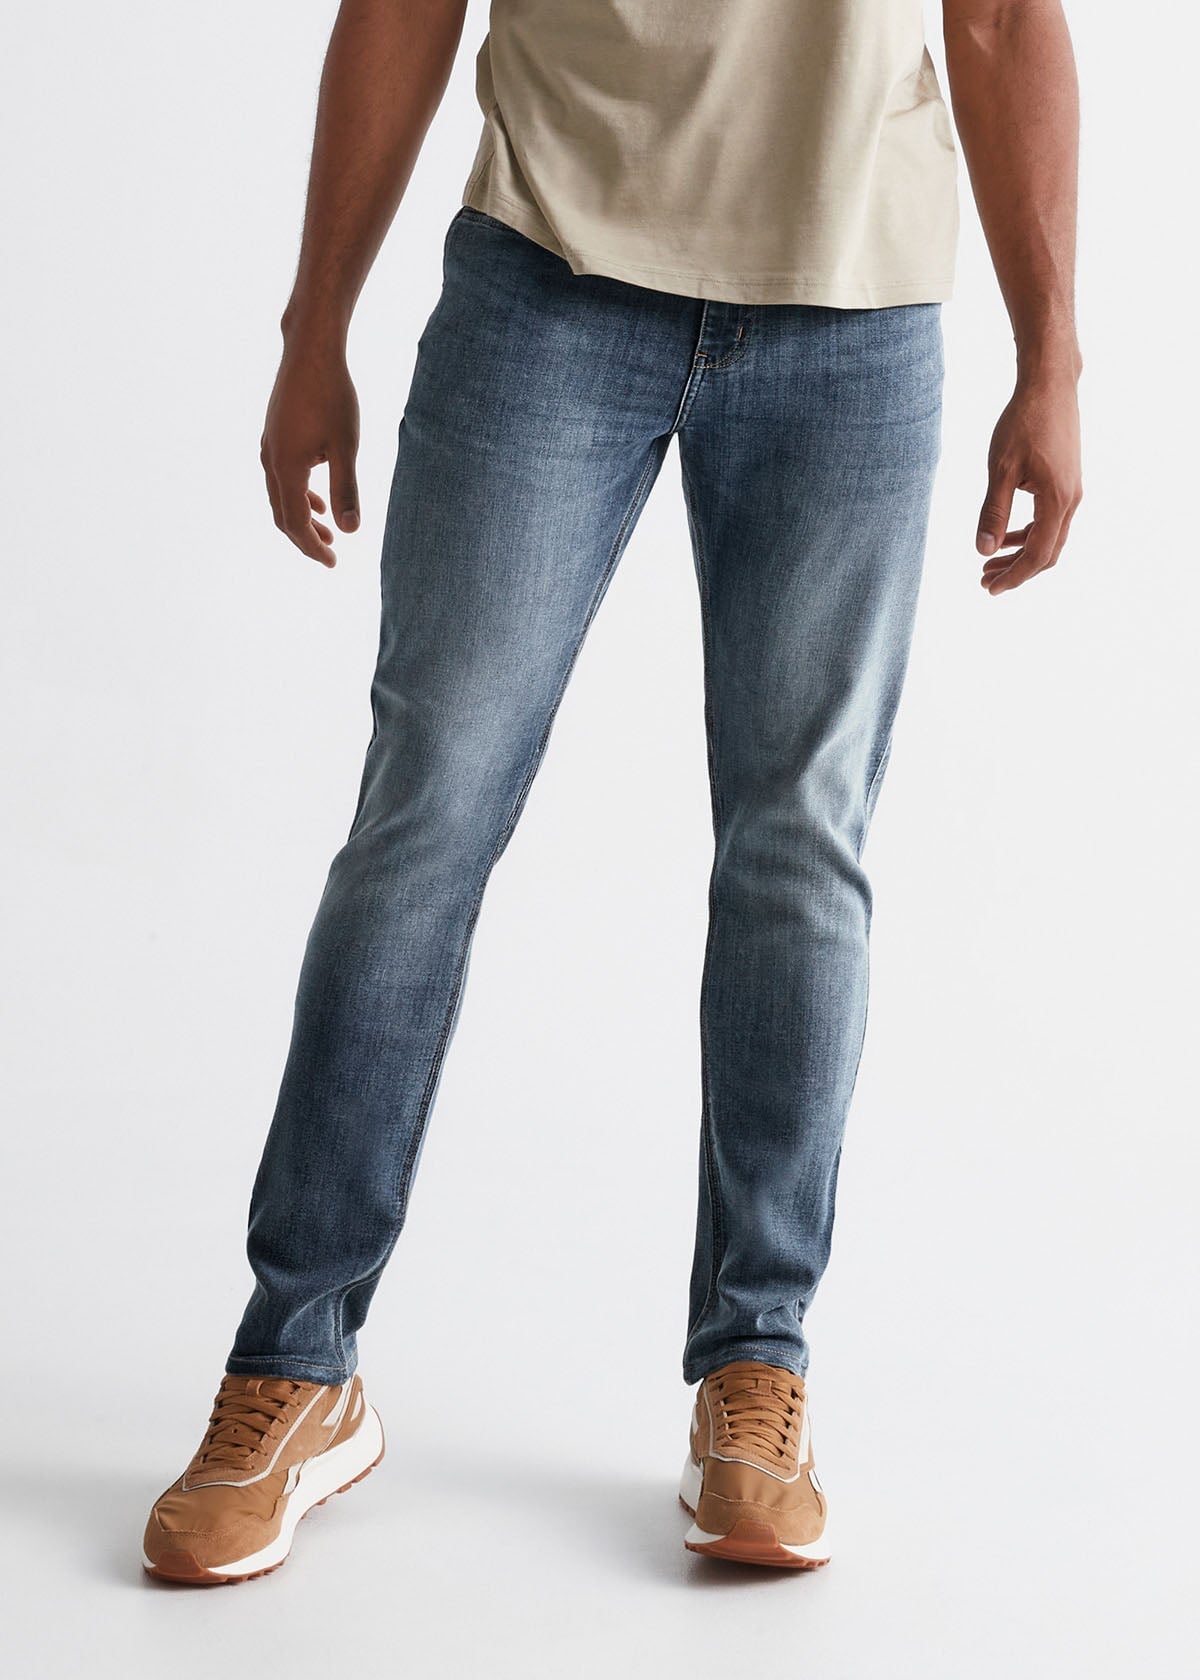 Buy Blue Jeans for Men by Cantabil Online | Ajio.com